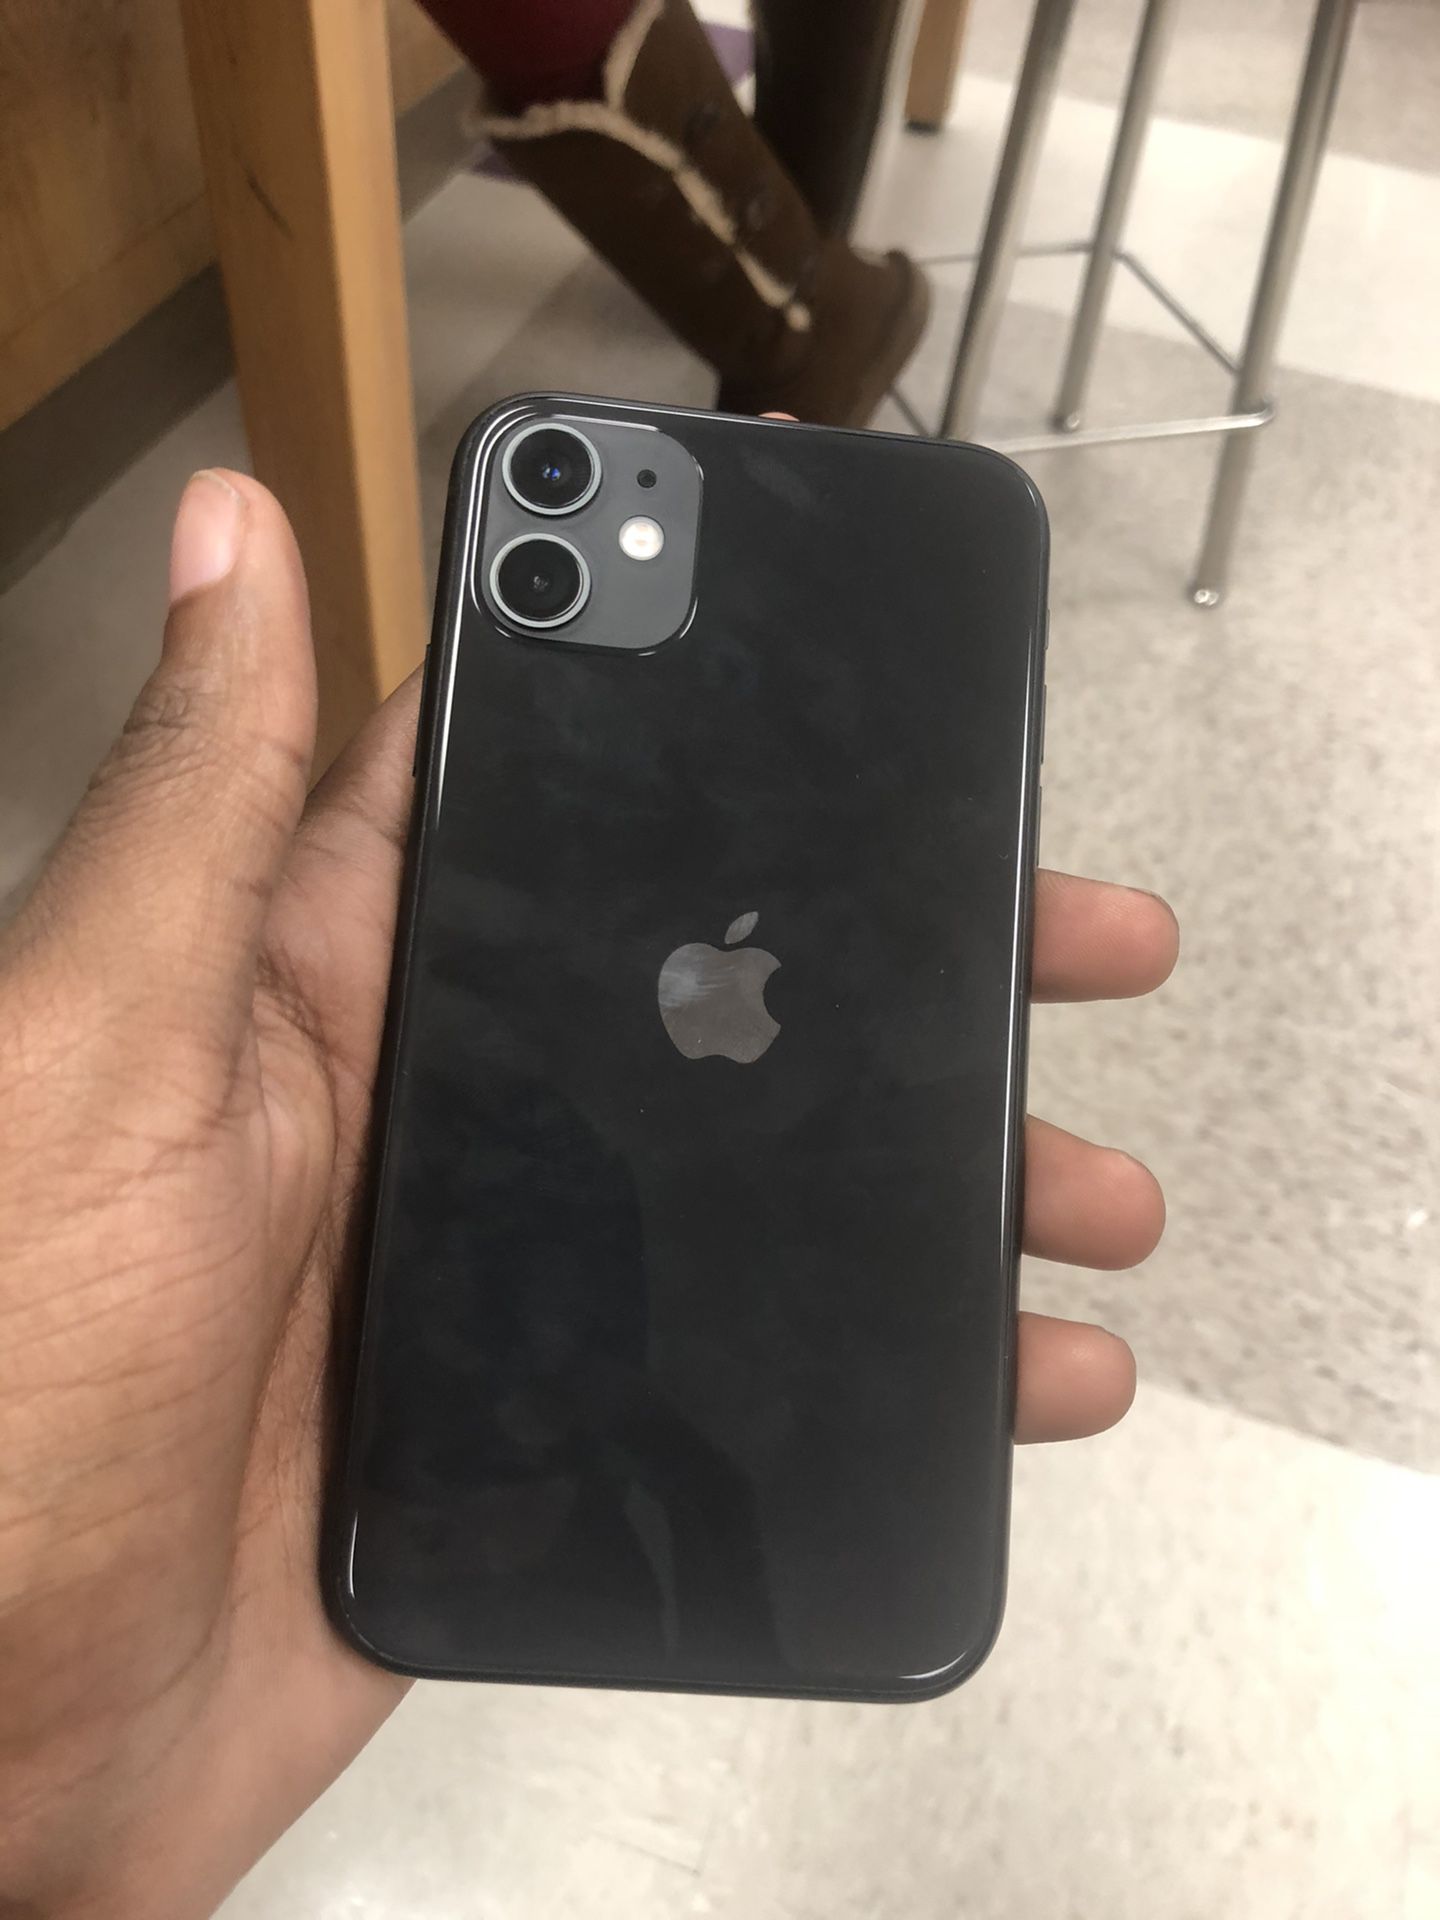 iPhone 11 ( not sending without a deposit ) !!